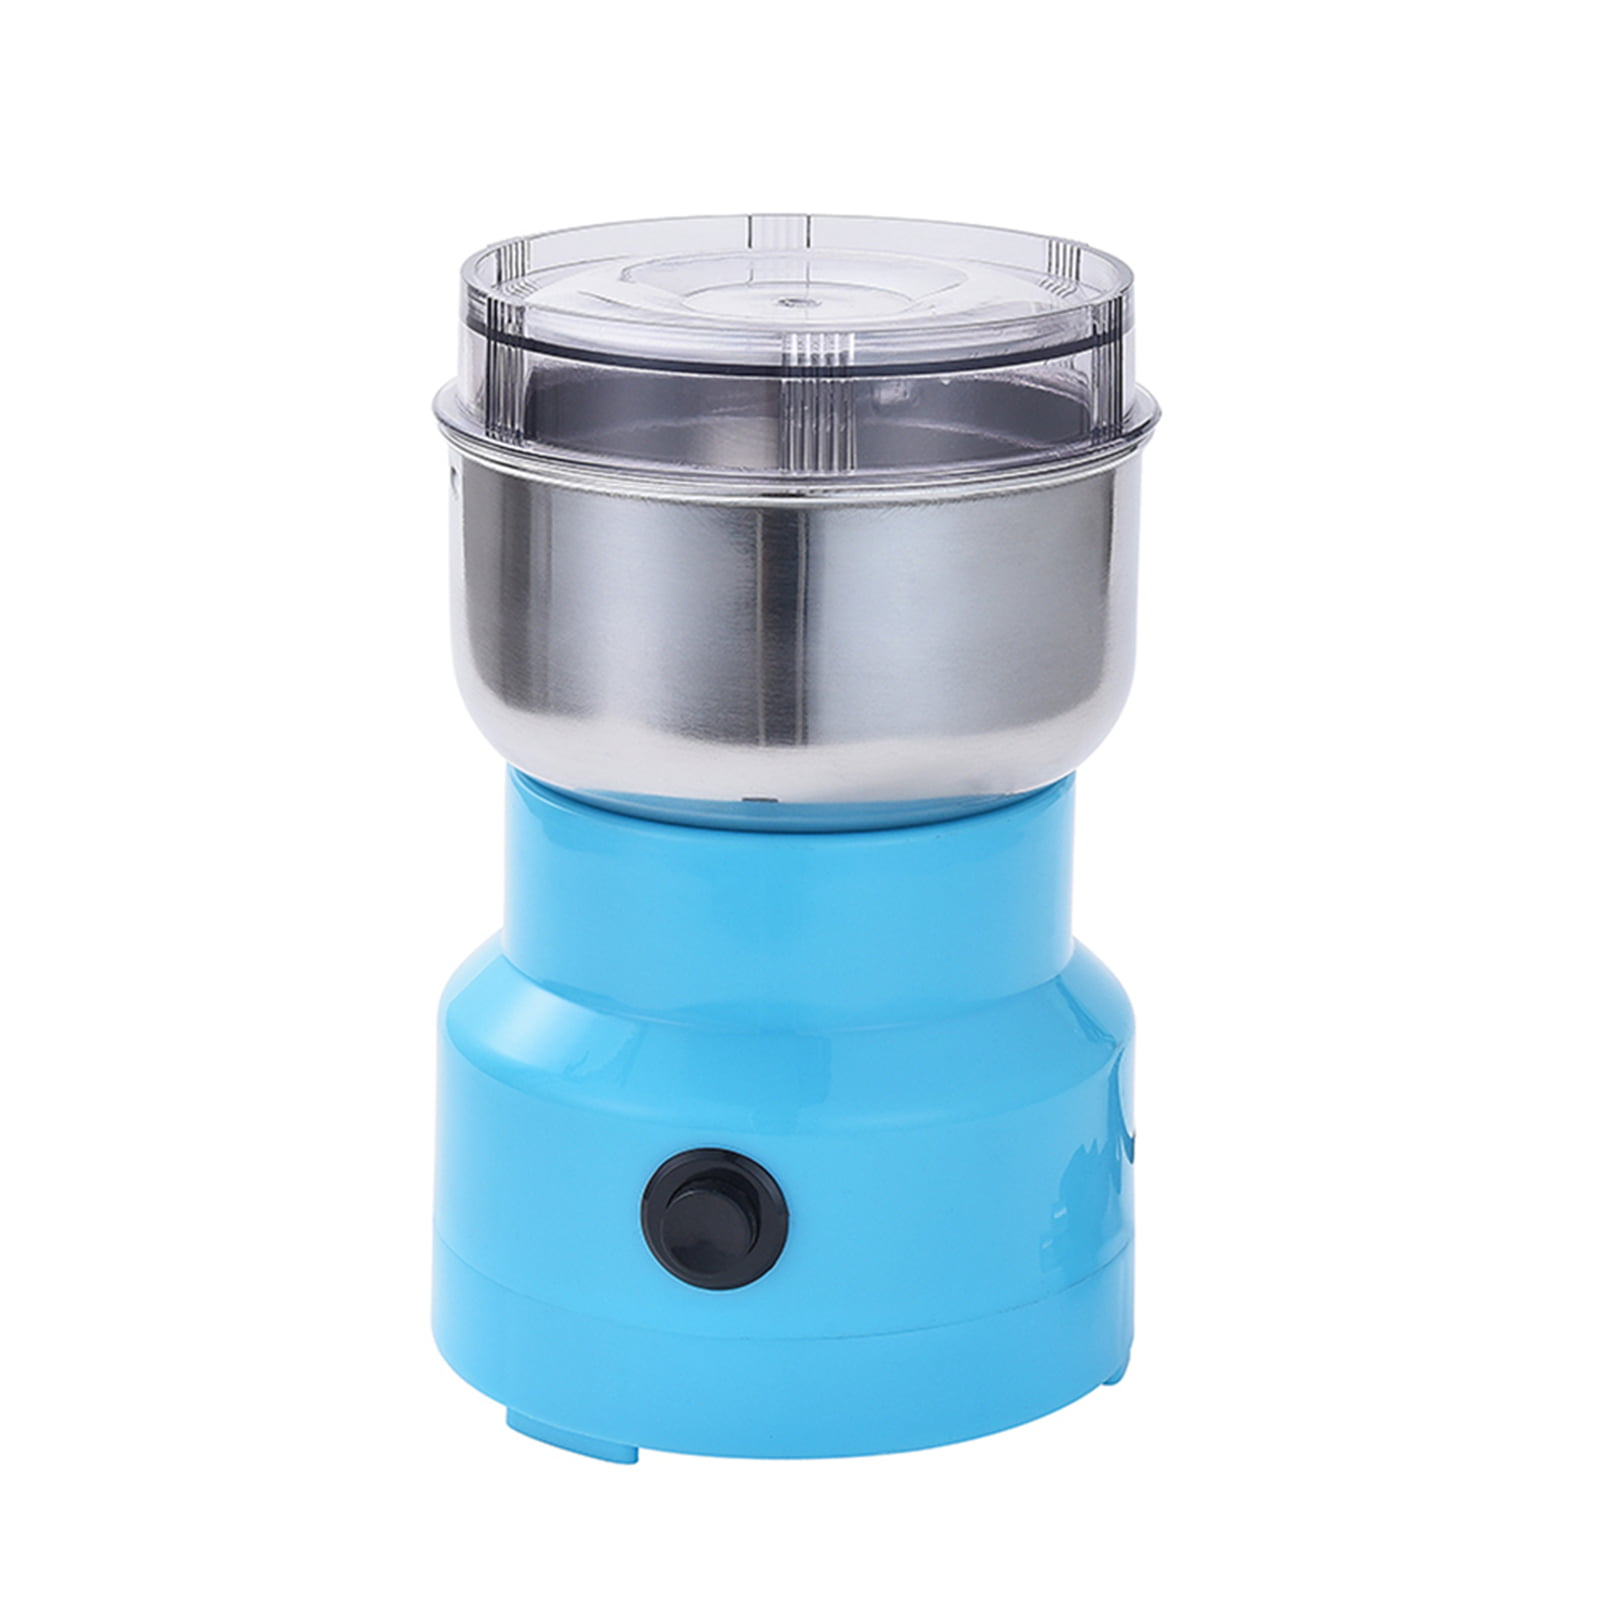 Mill Spice Herb Portable Electric Grinding Machine Tool Pulverizer Machine for Herbs/Spices/Nuts/Grains/Coffee Bean Multifunction Smash Machine 